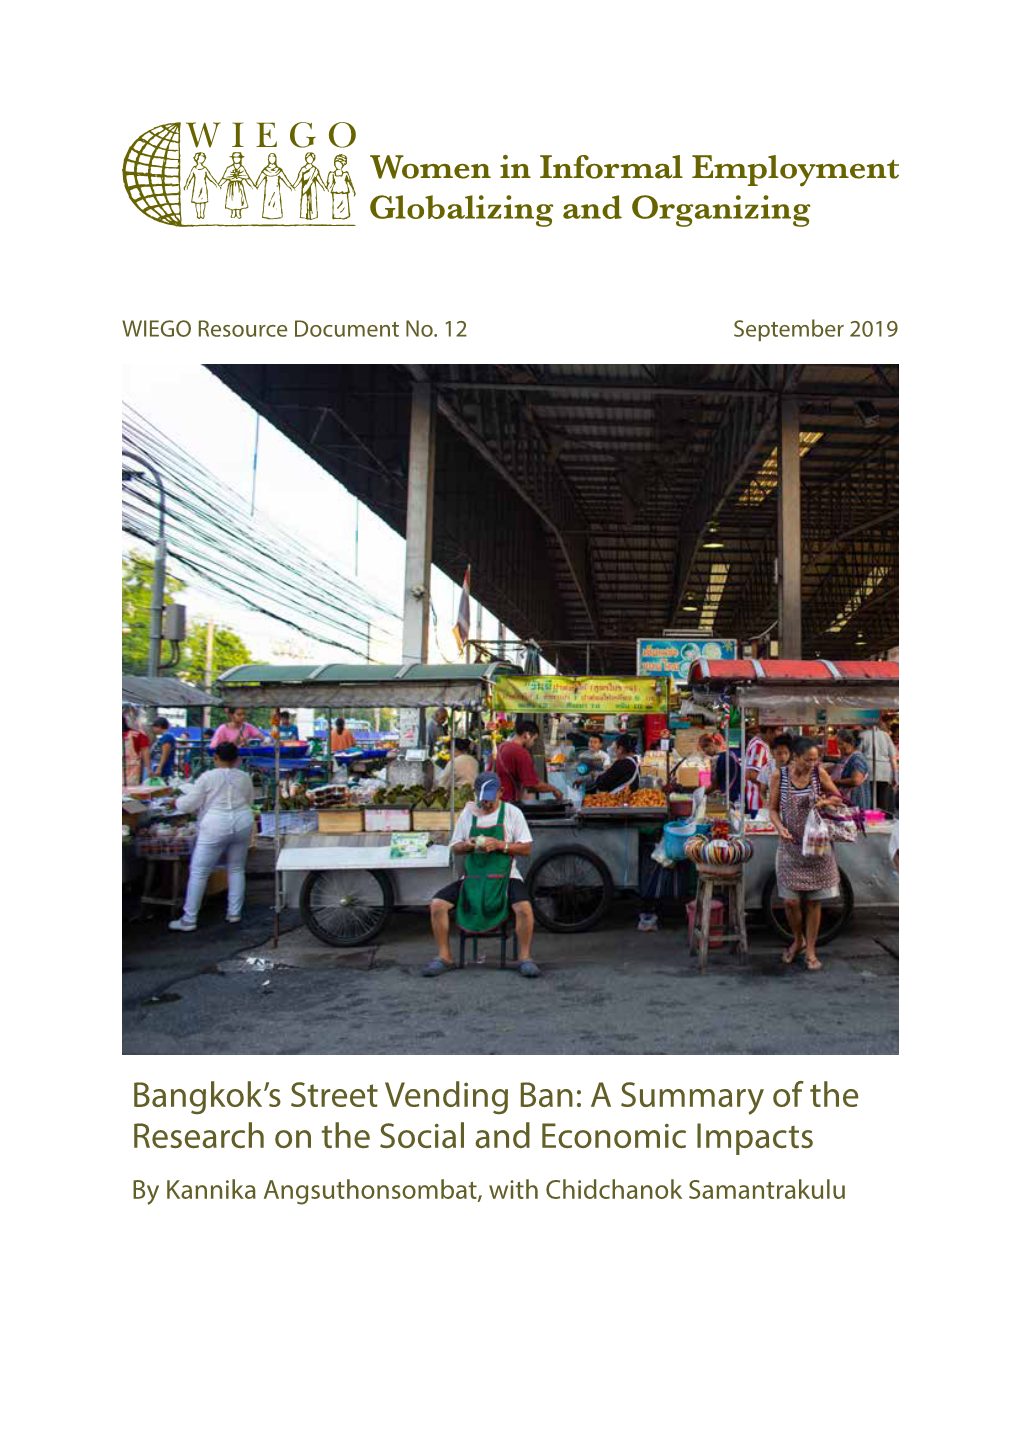 Bangkok's Street Vending Ban: a Summary of the Research on the Social and Economic Impacts